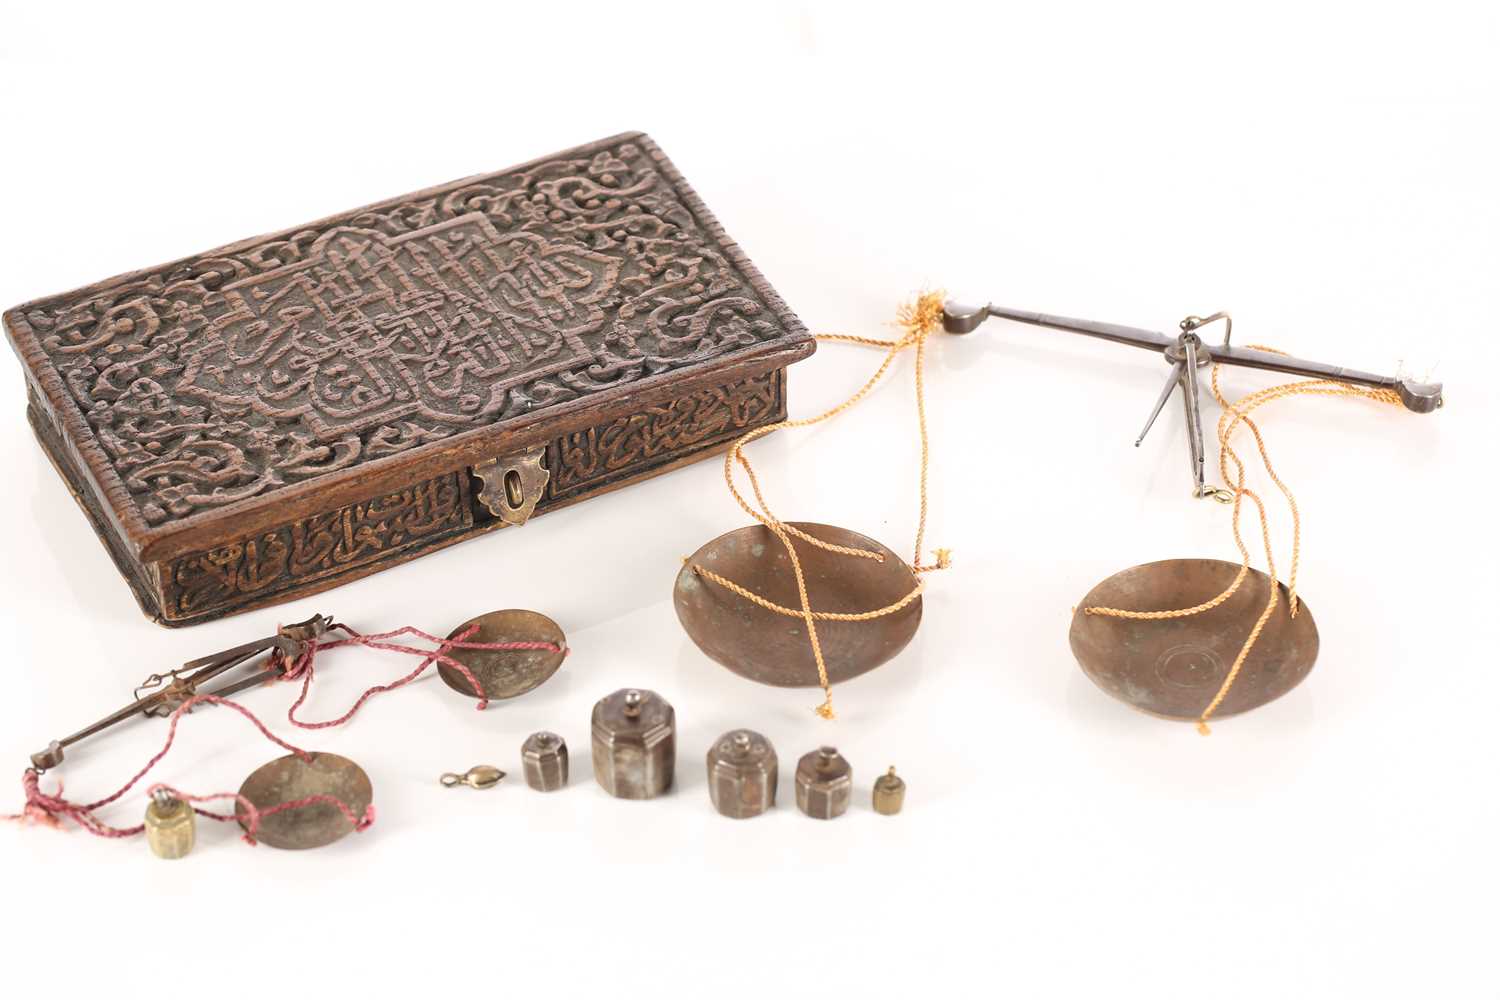 An Eastern coin scale in a fitted teak case carved with Islamic script, with two beams and pans in